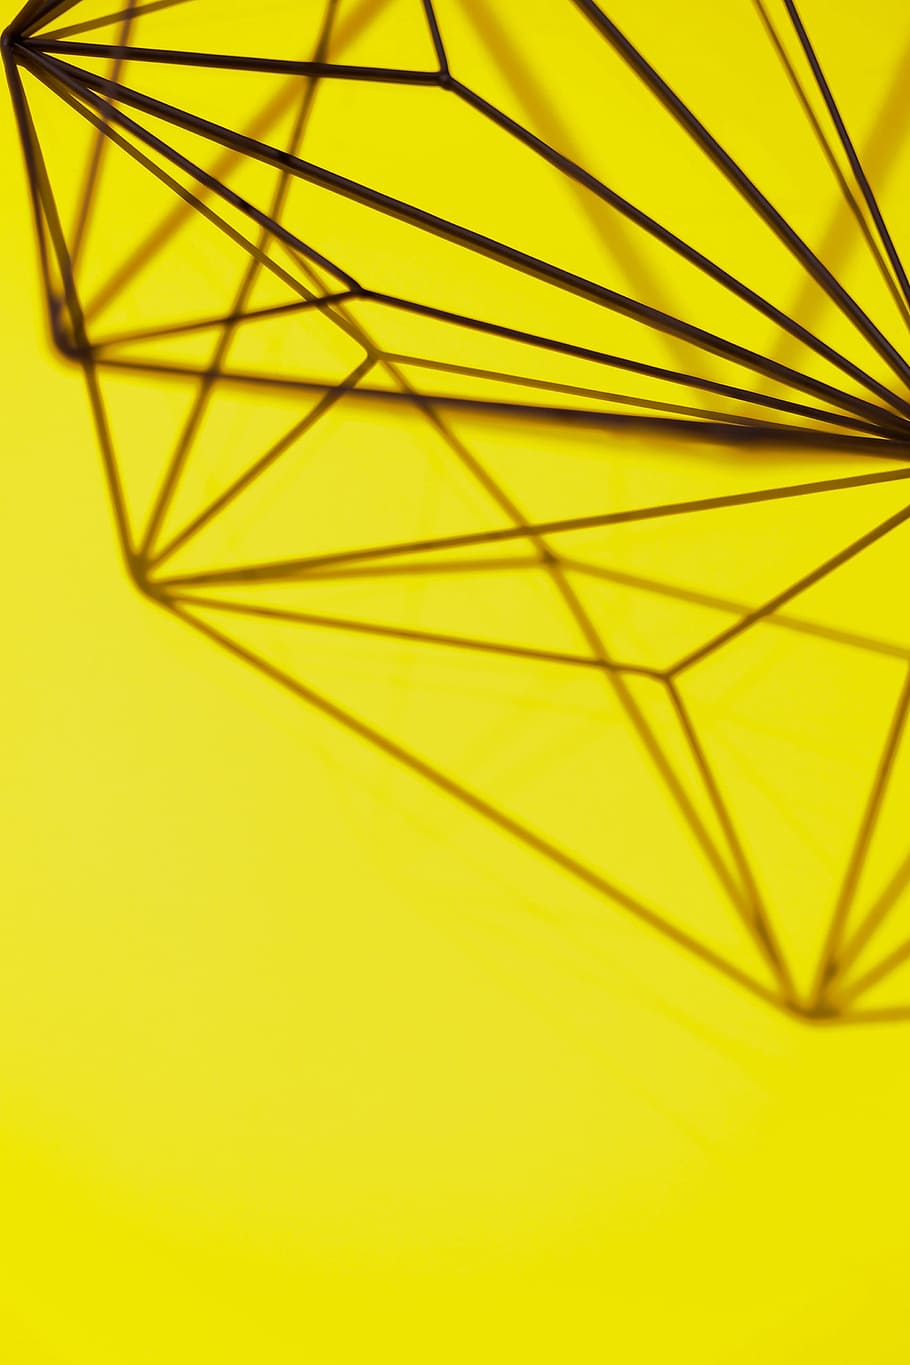 geometric, decoration, yellow, background, texture, studio shot, backgrounds, close-up, colored background, abstract